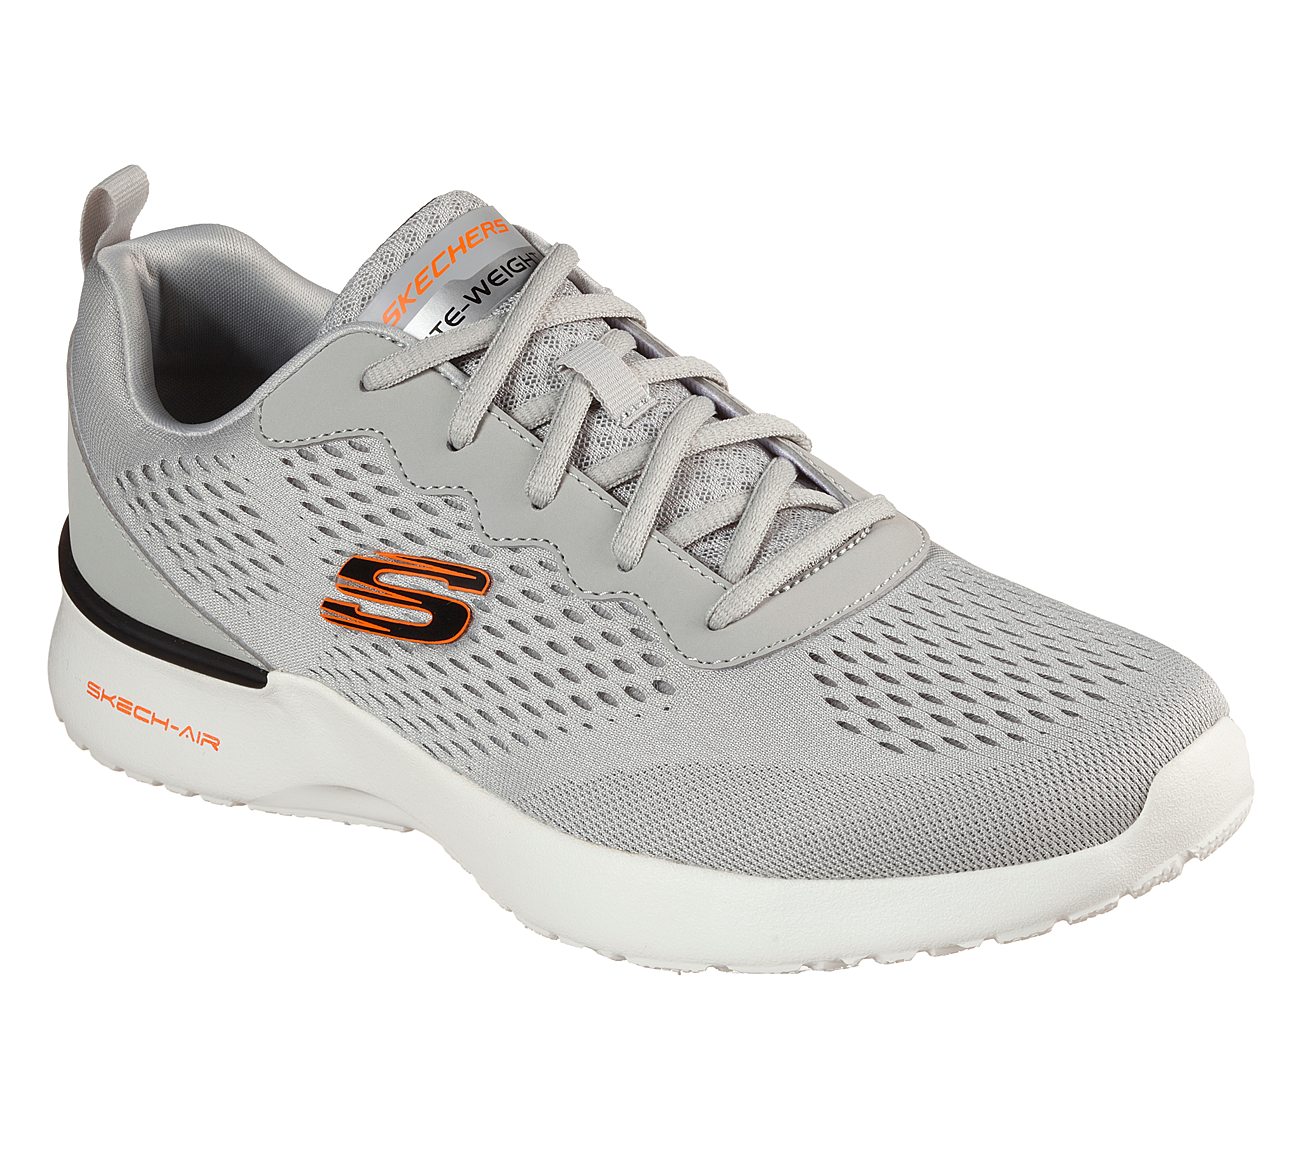 SKECH-AIR DYNAMIGHT-TUNED UP, GREY Footwear Lateral View